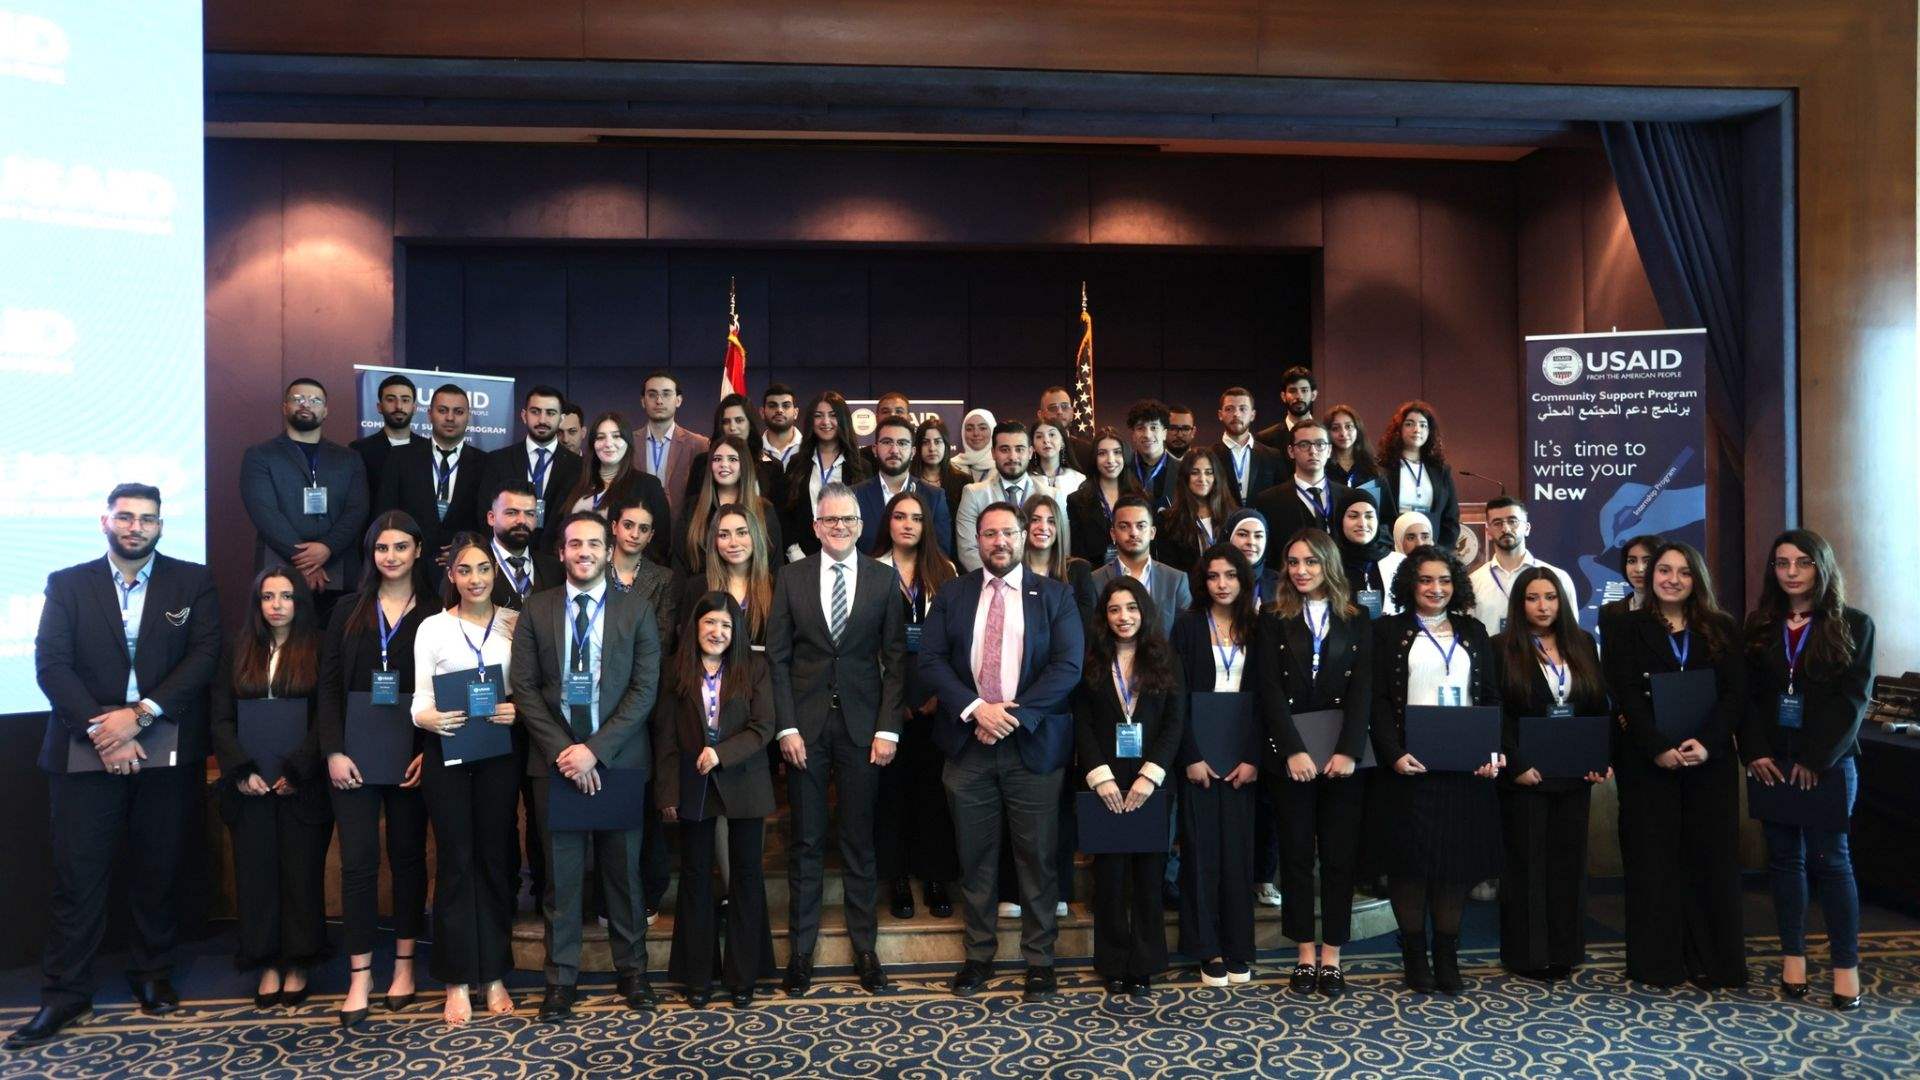 USAID&#39;s Community Support Program marks completion of 76 students&#39; internships  